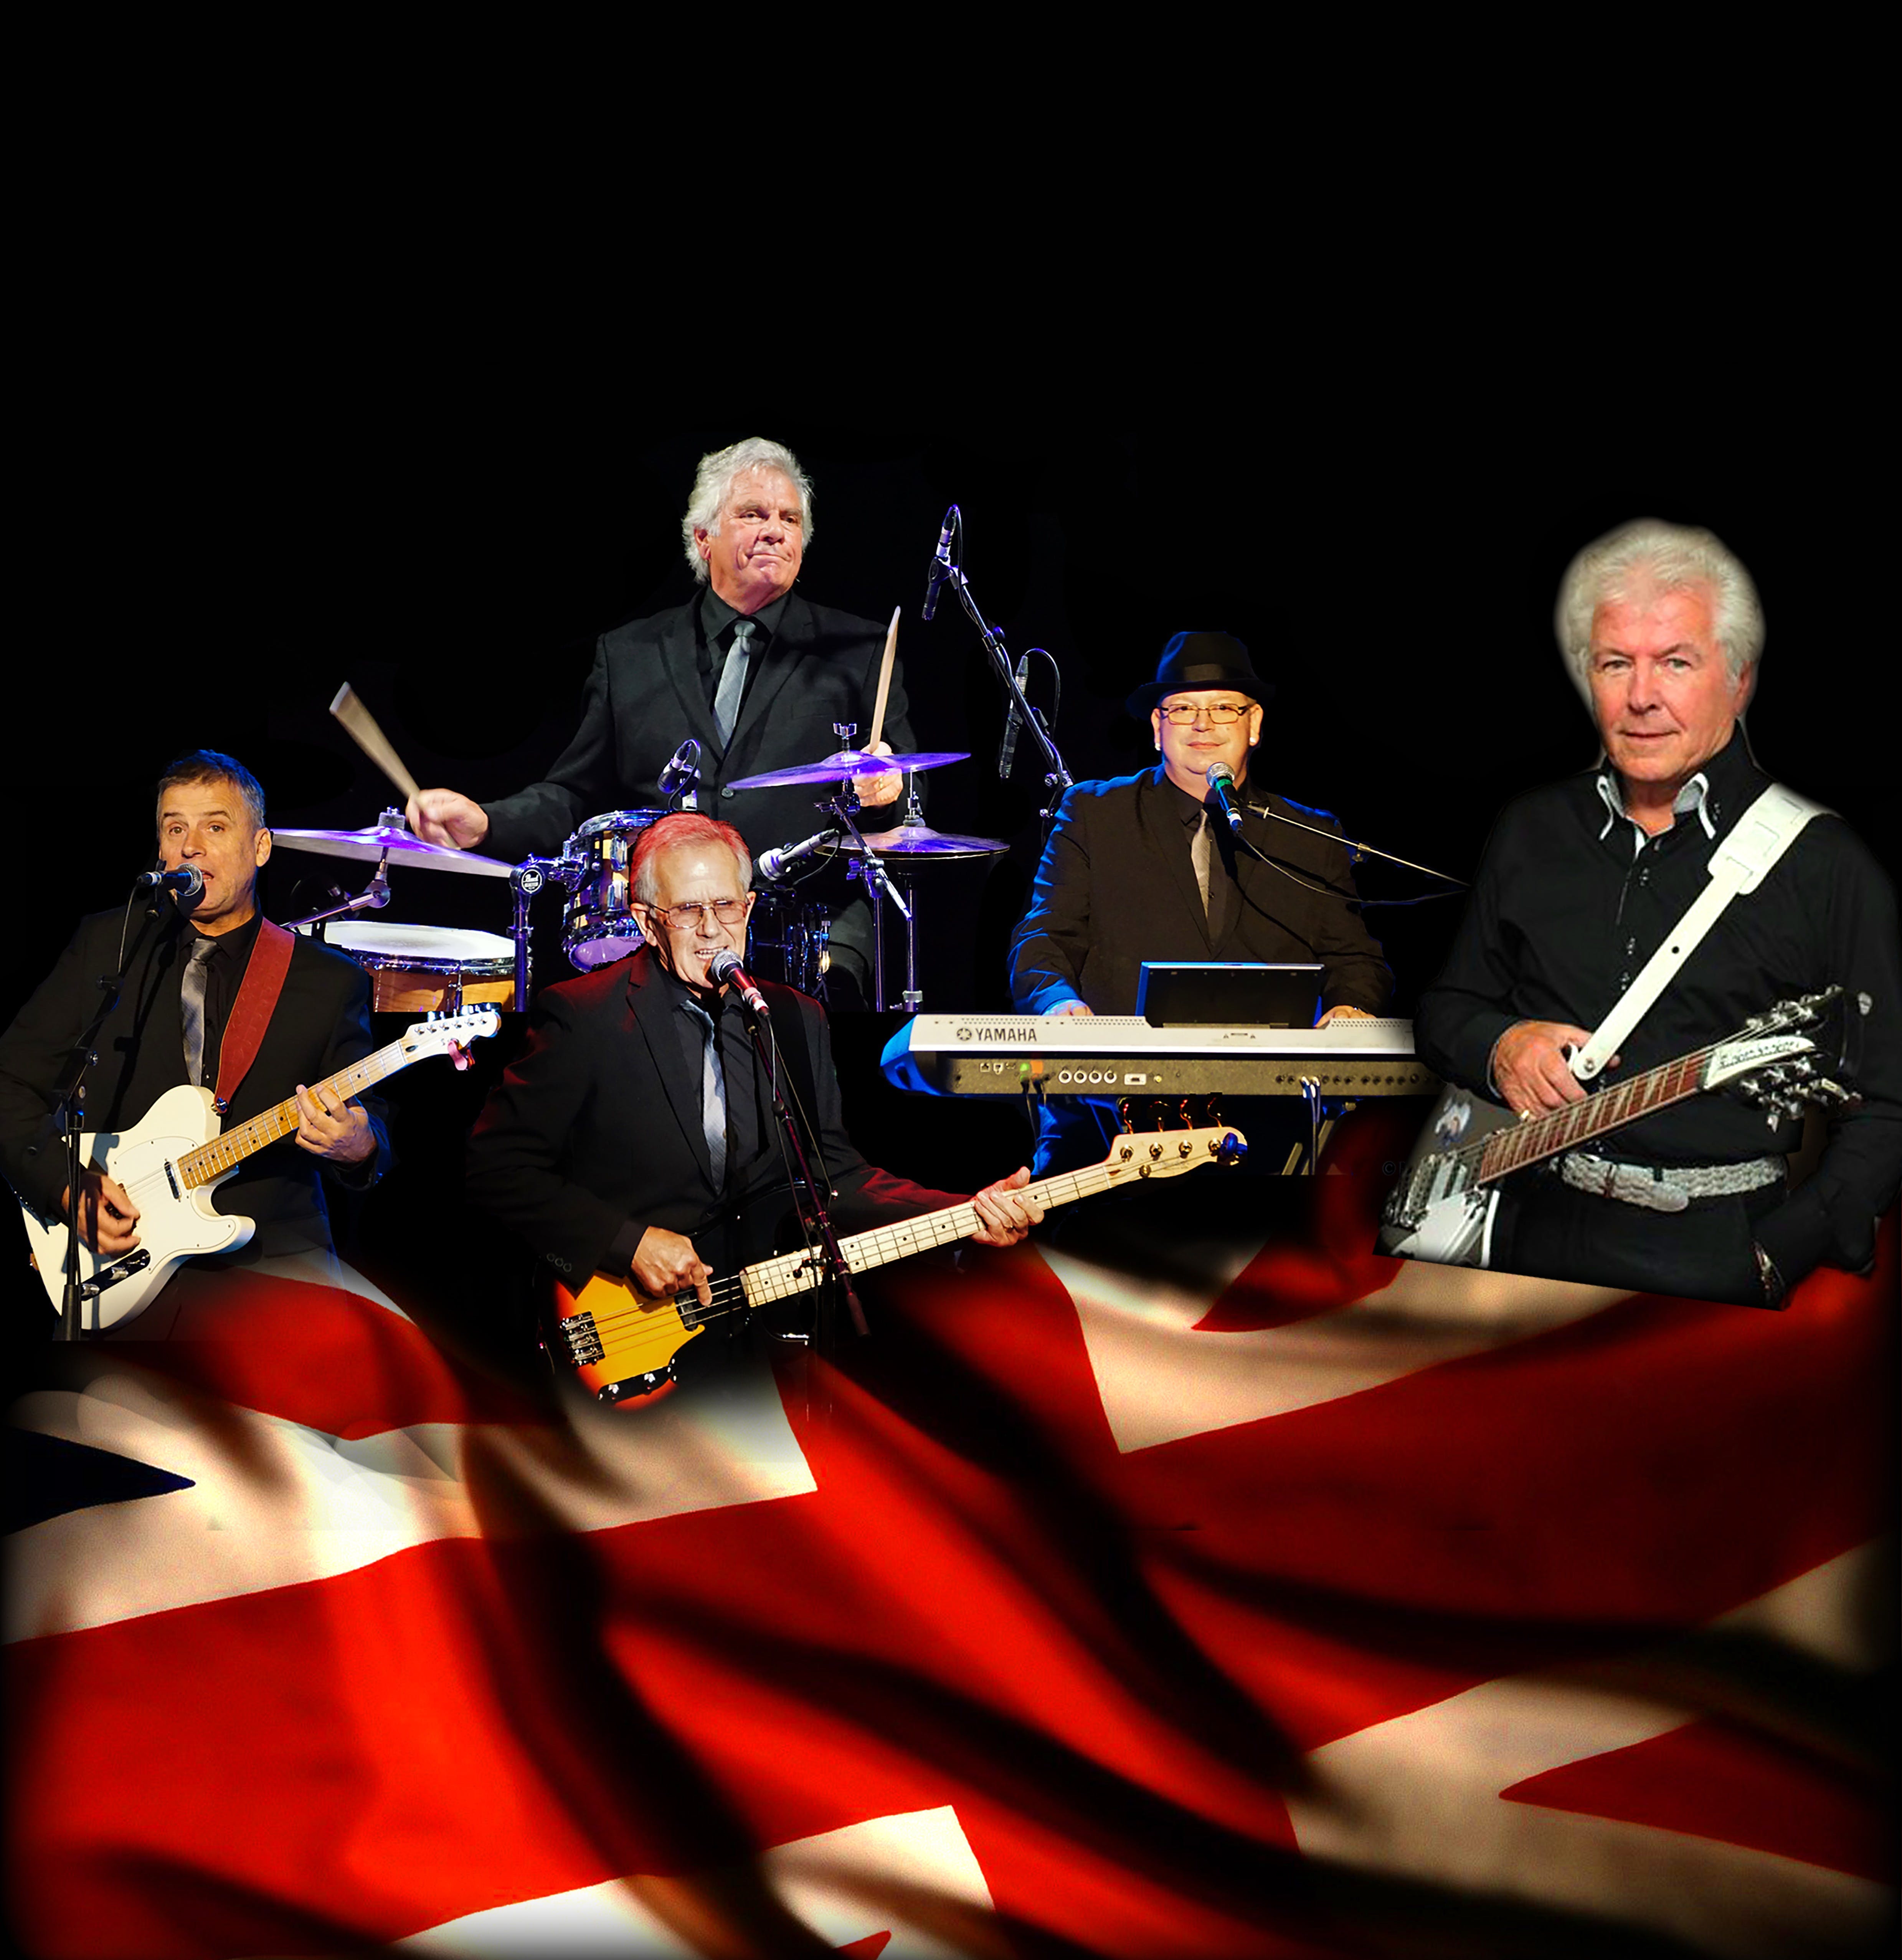 Herman's Hermits with Special Guest Mike Pender - The Six O'Clock Hop - Melbourne Tourism